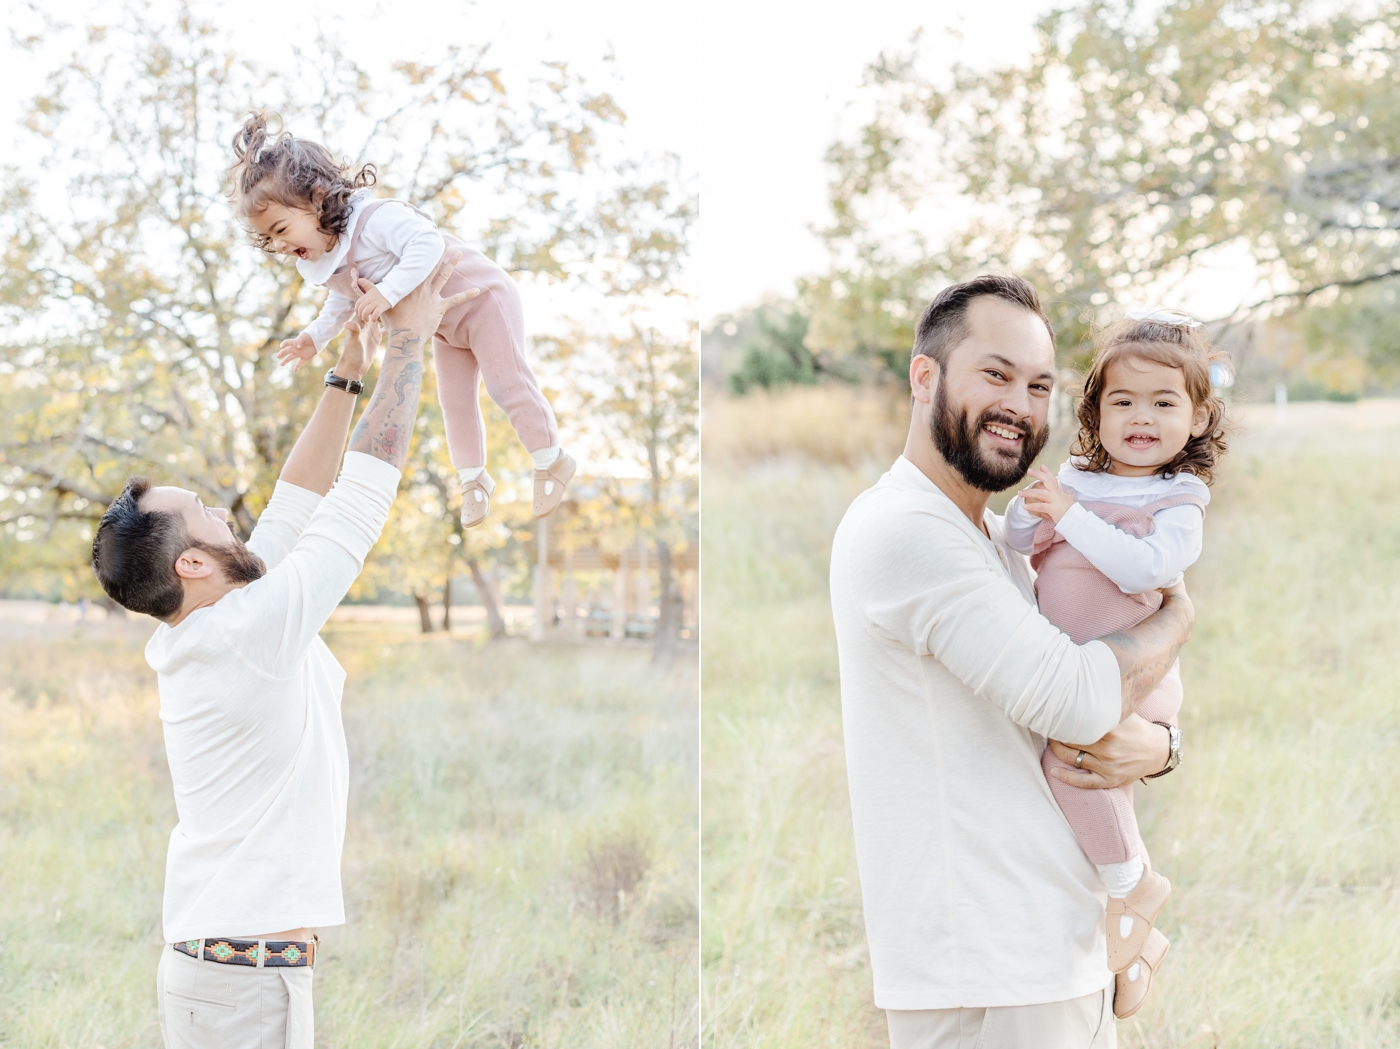 Playful images of Dad and daughter in Austin park during family session with Sana Ahmed Photography.